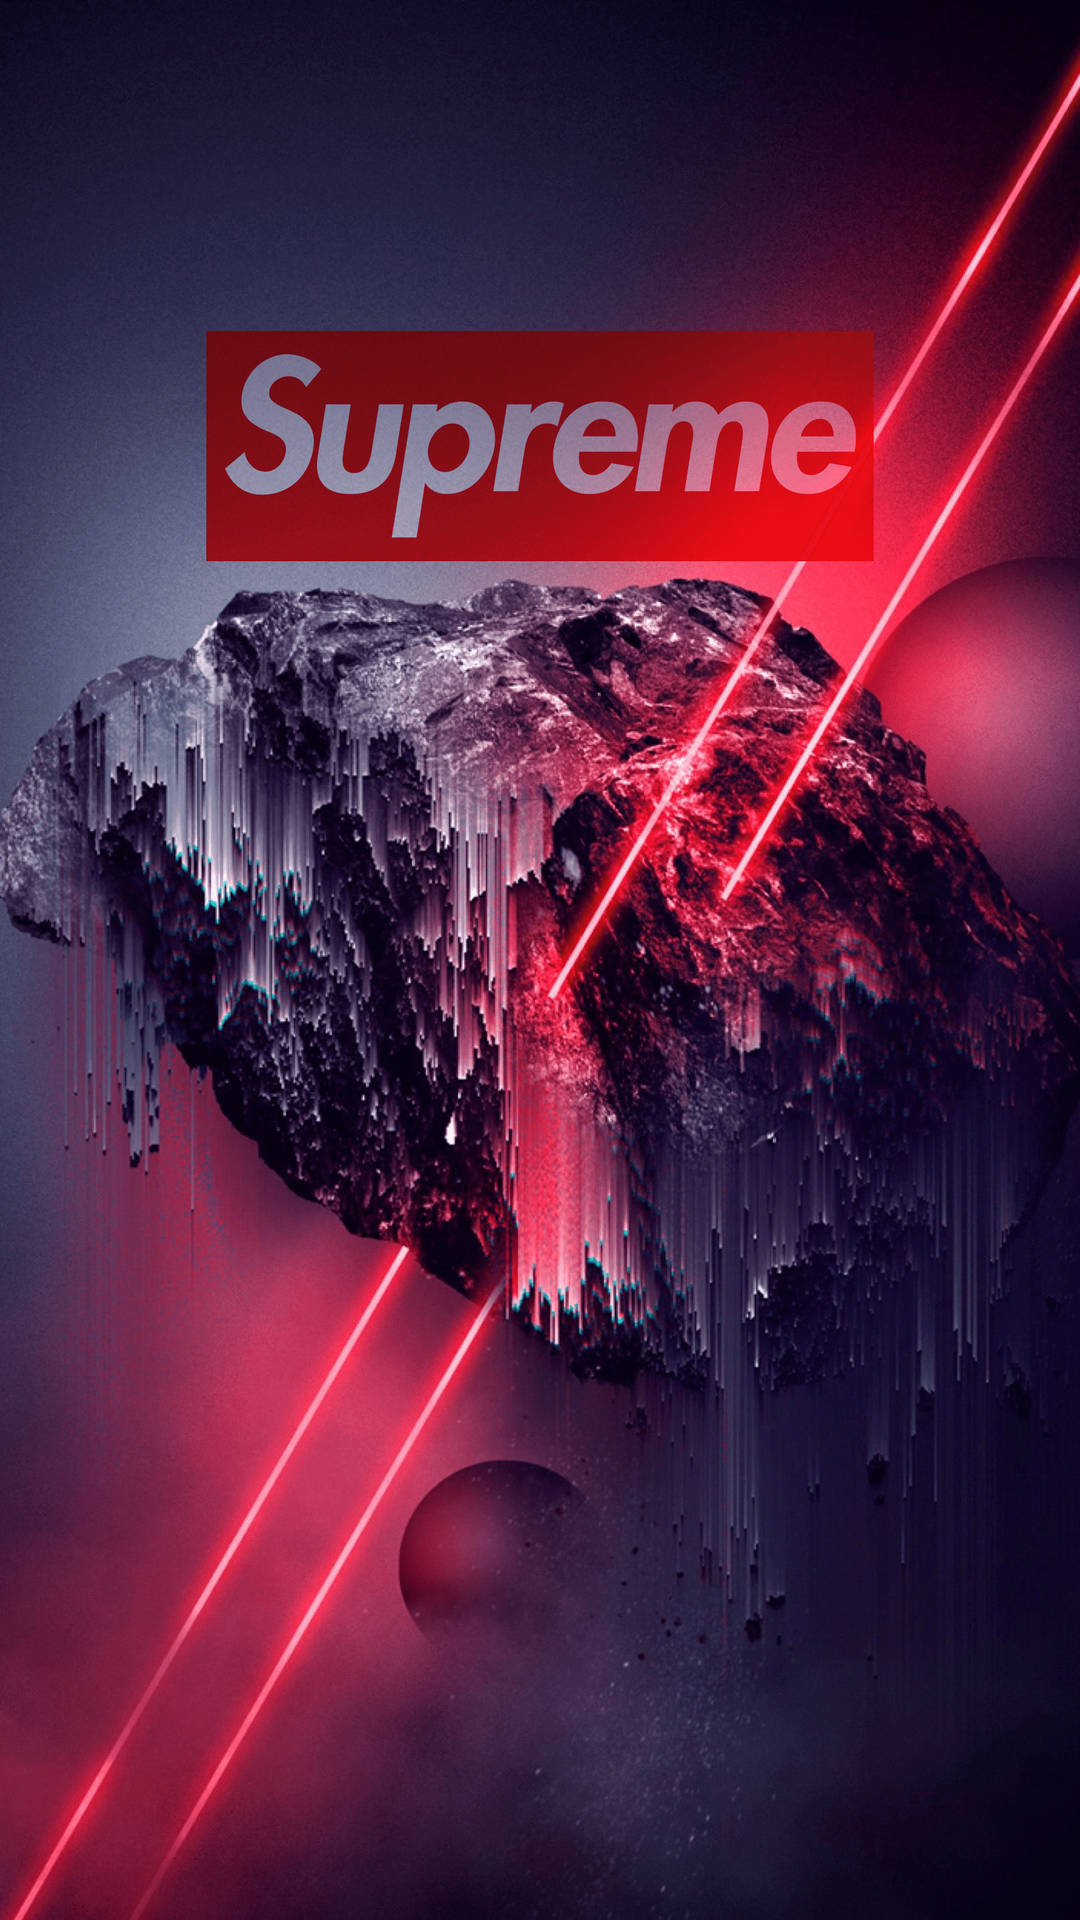 Download Supreme Louis Vuitton And Off White iPhone Wallpaper | Wallpapers .com